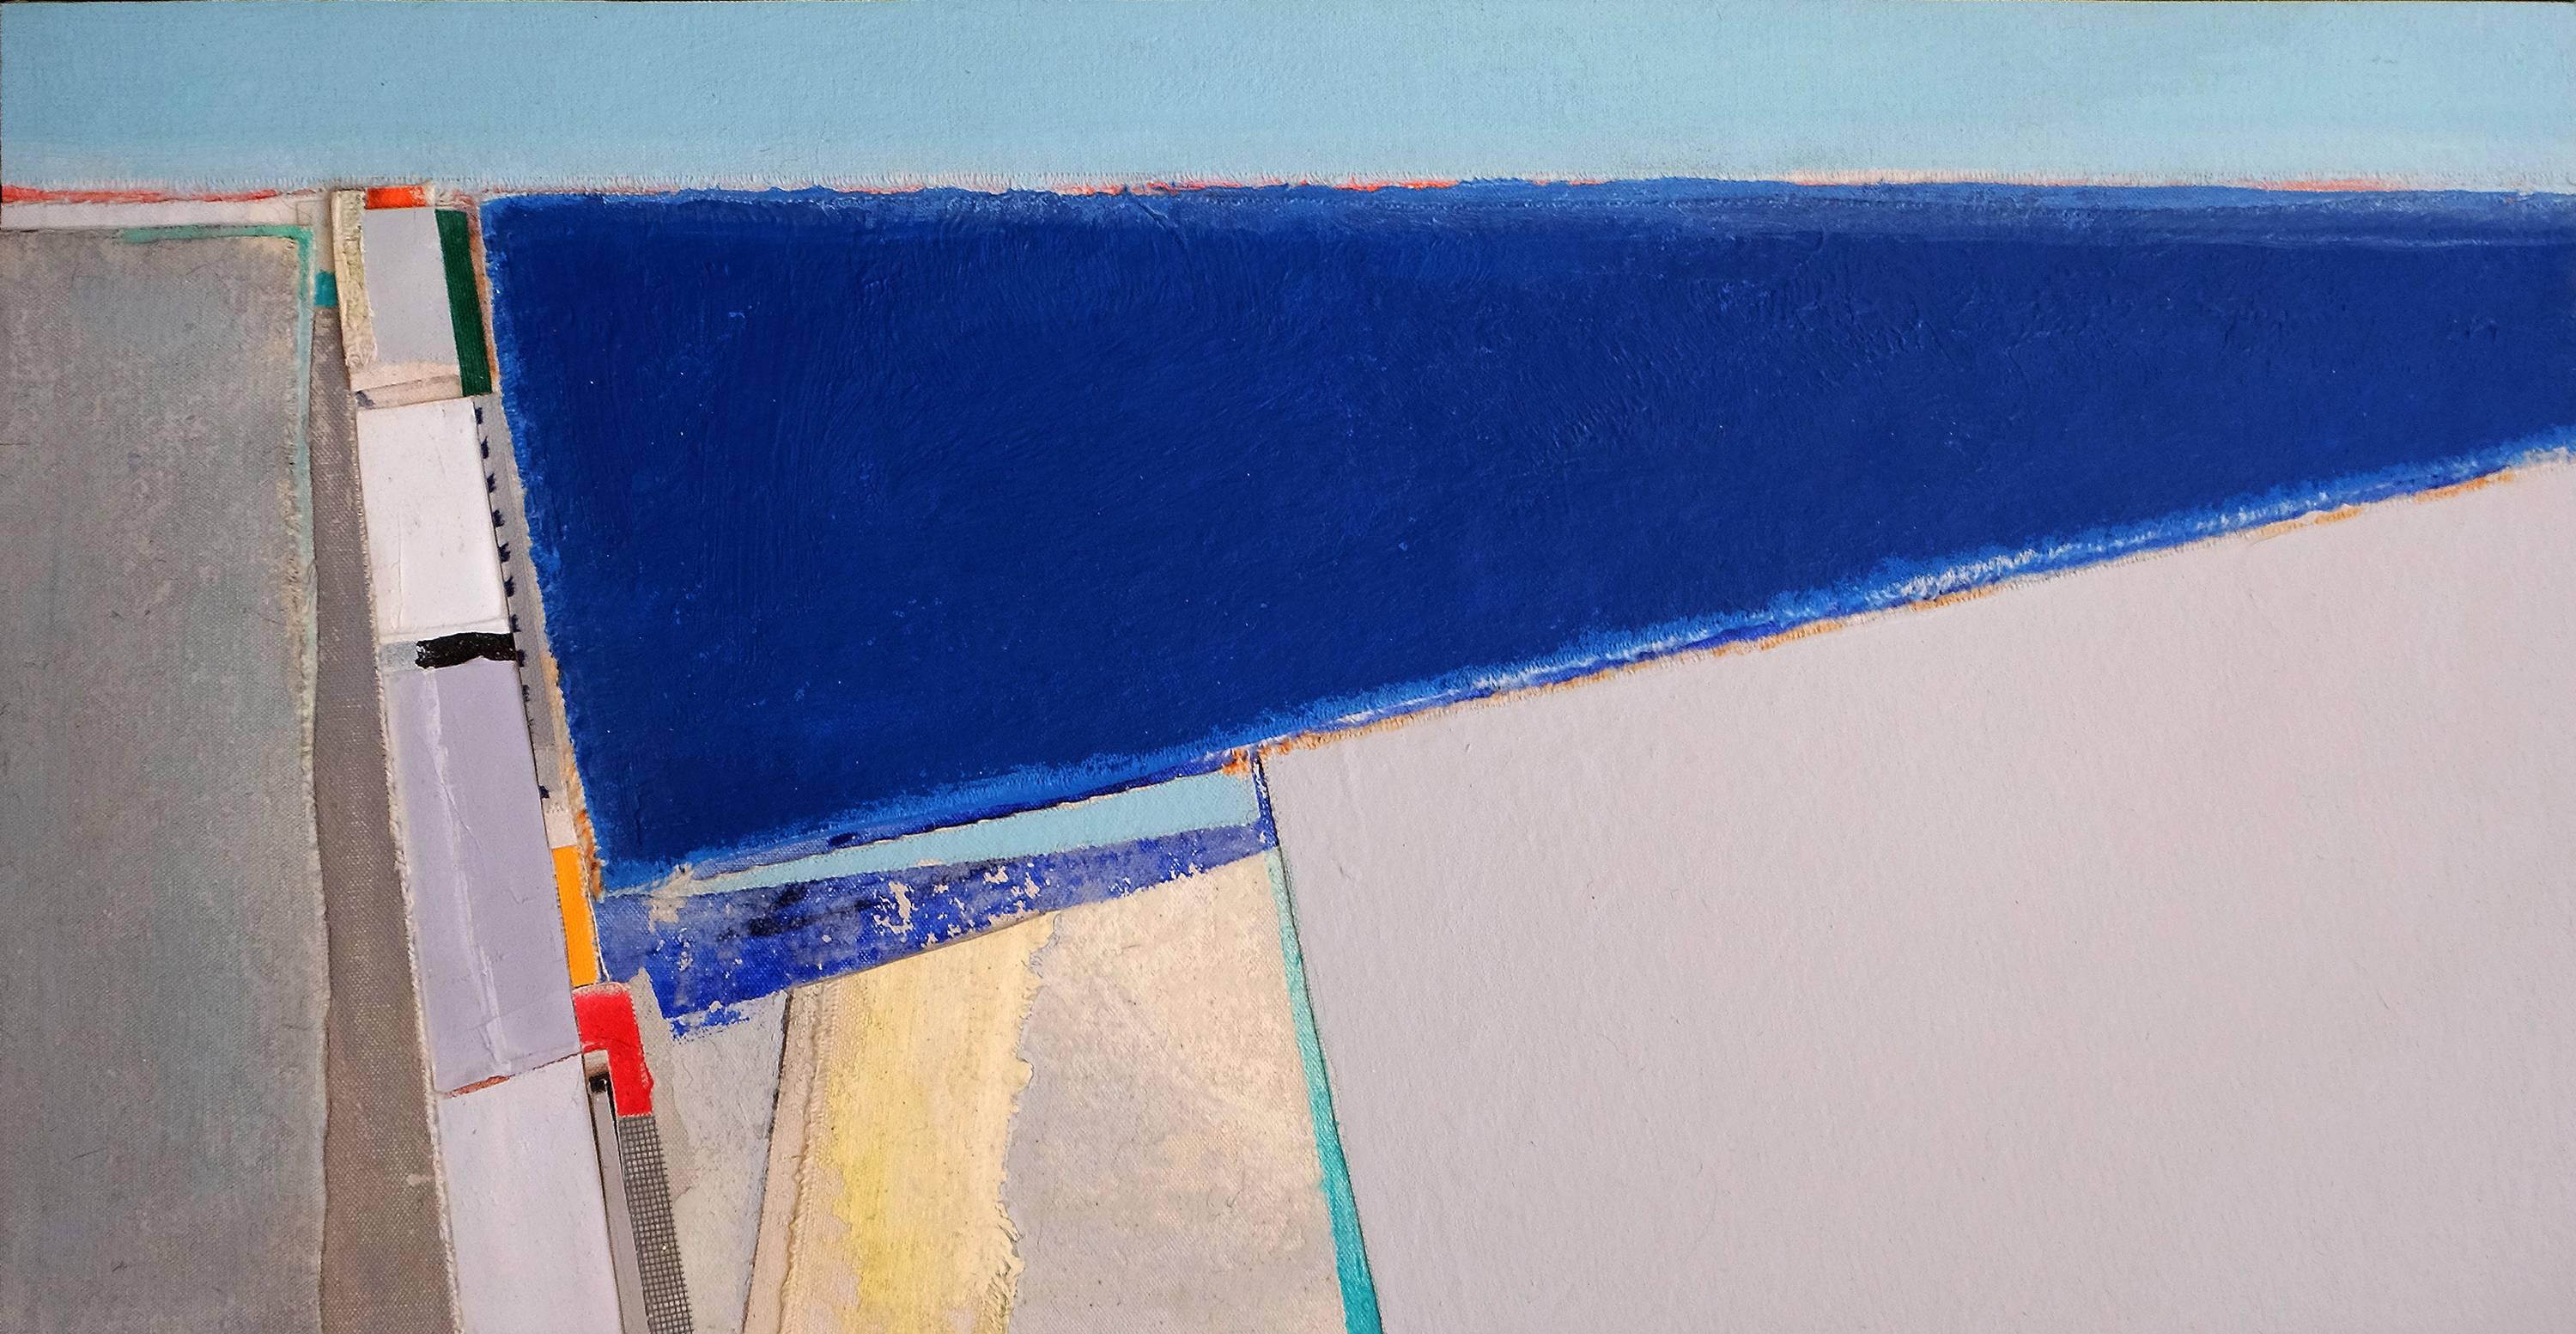 “Middle Beach” by Eugene Healy, 2017. Fabric collage and oil on canvas,. 13.5h x 26.75w in. Framed at 20 x 33 in. This abstract, landscape painting features an abstracted seascape with land and sea in aerial view. In calming colors of deep blue,